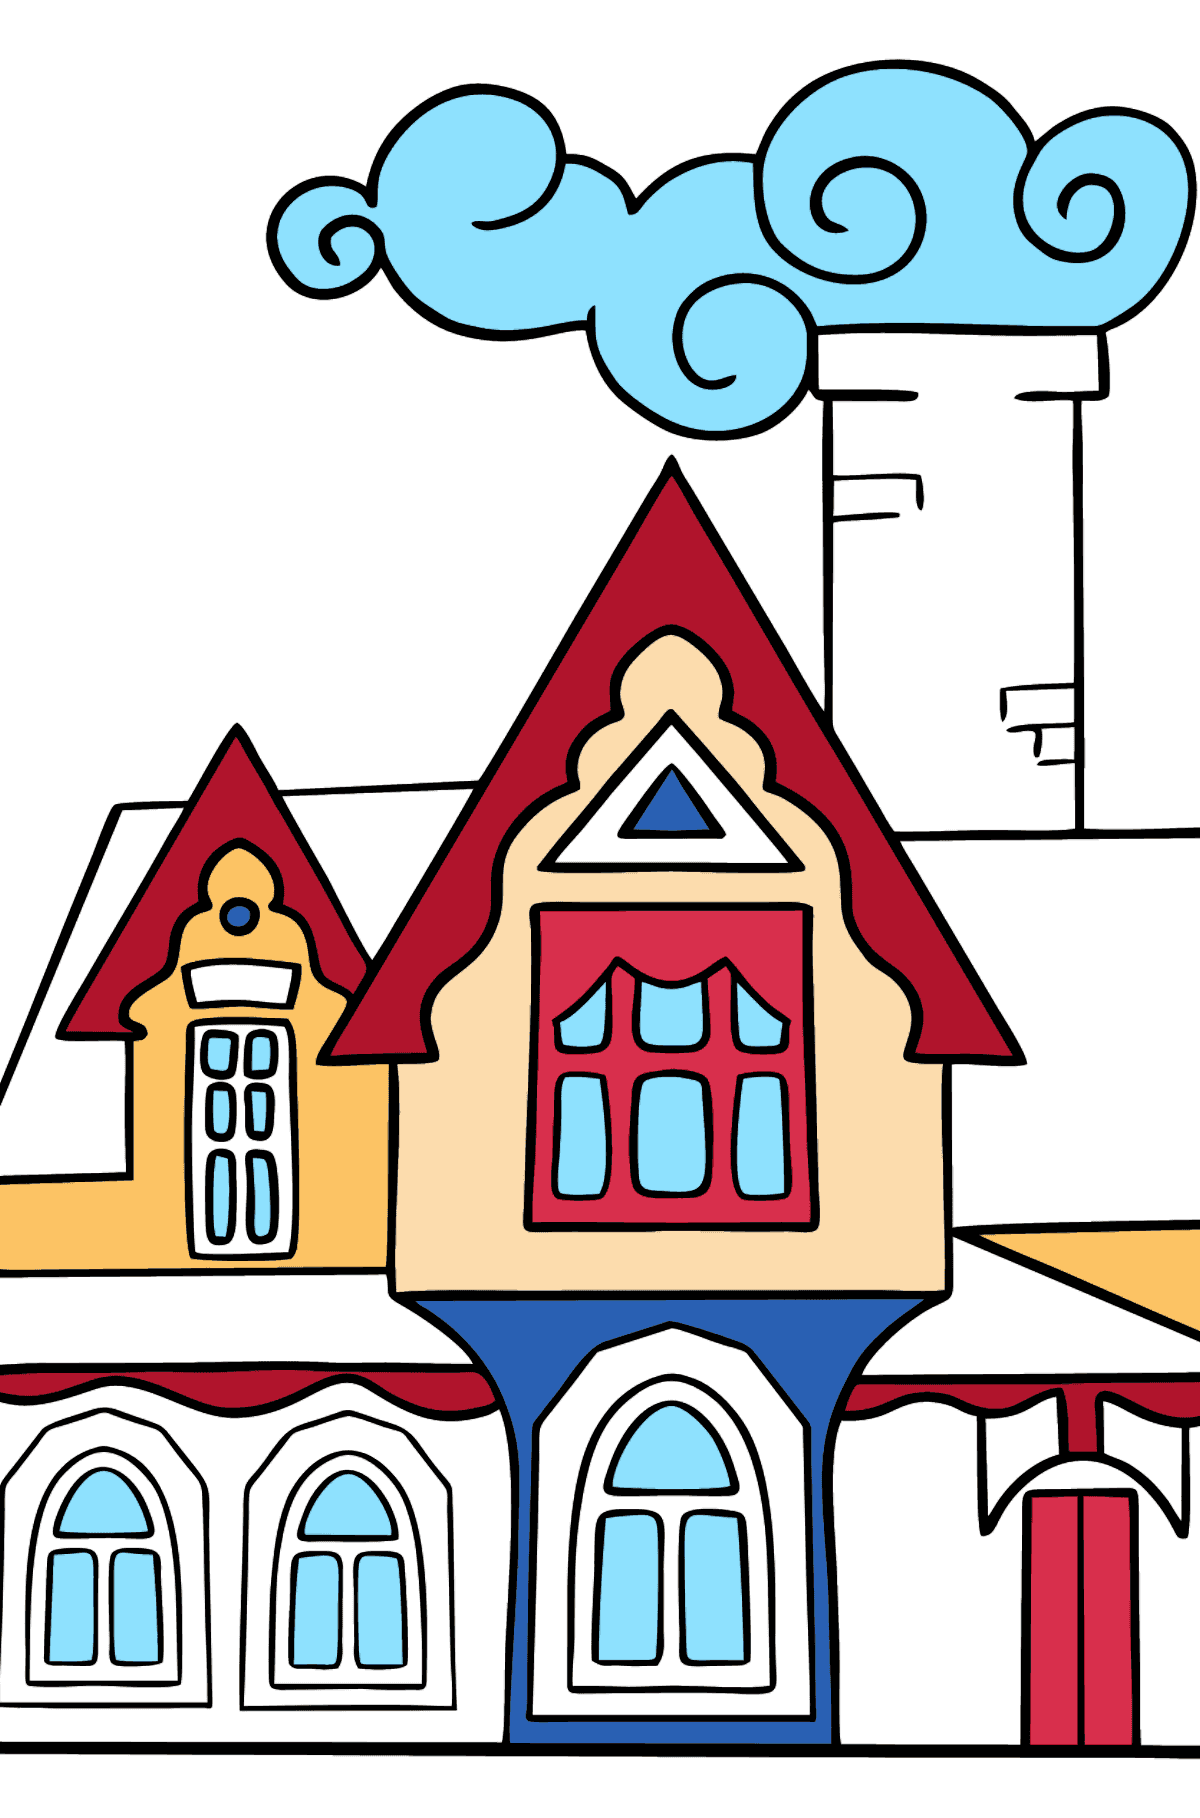 Complex Coloring Page - A Miraculous House - Coloring Pages for Kids